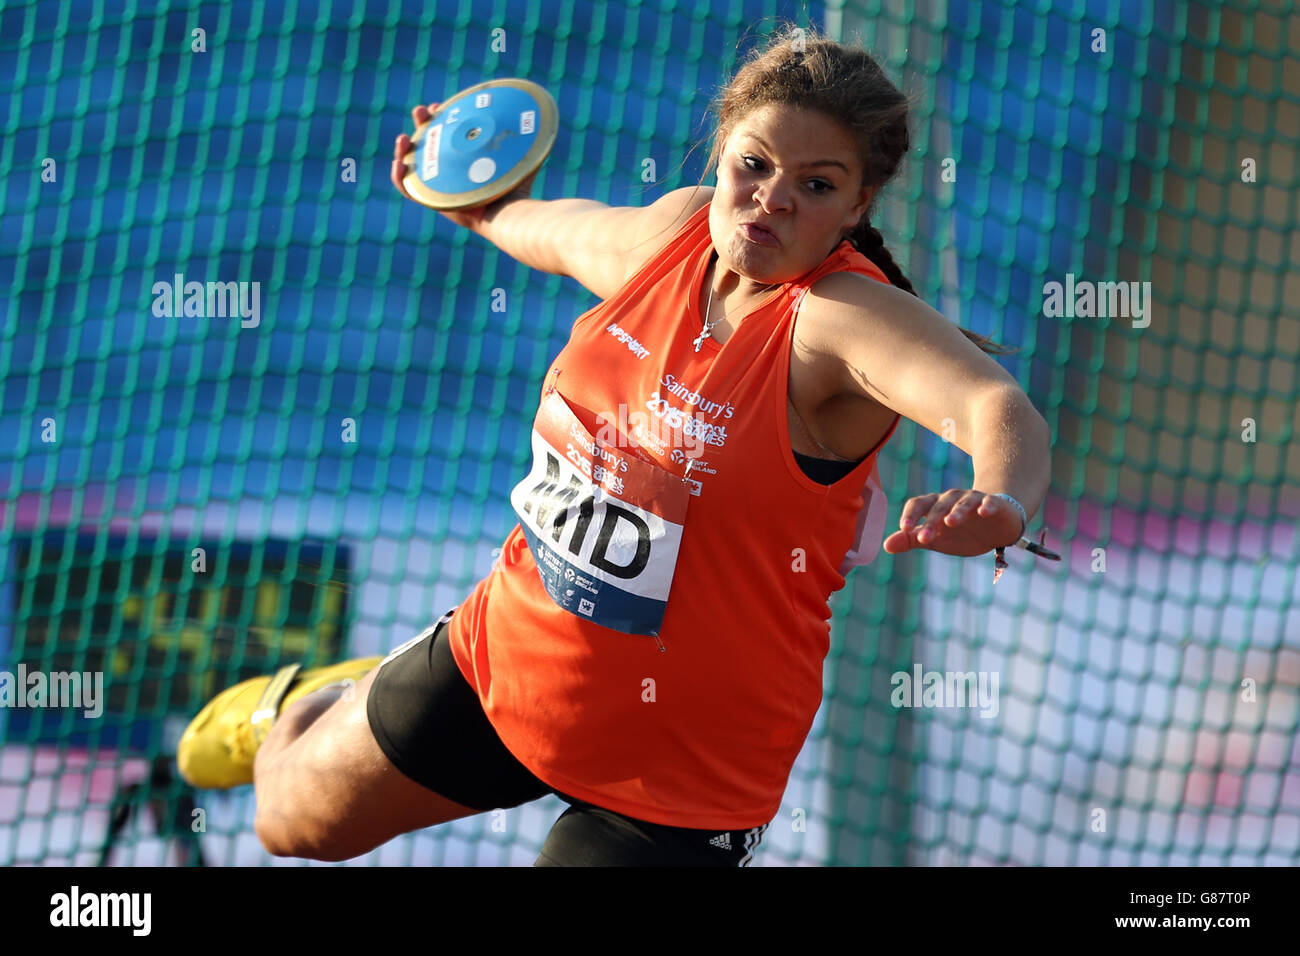 England Midlands' Luisa Chantler-Edmond competes in the girls discus at the Sainsbury's 2015 School Games at the Manchester Regional Arena. Stock Photo